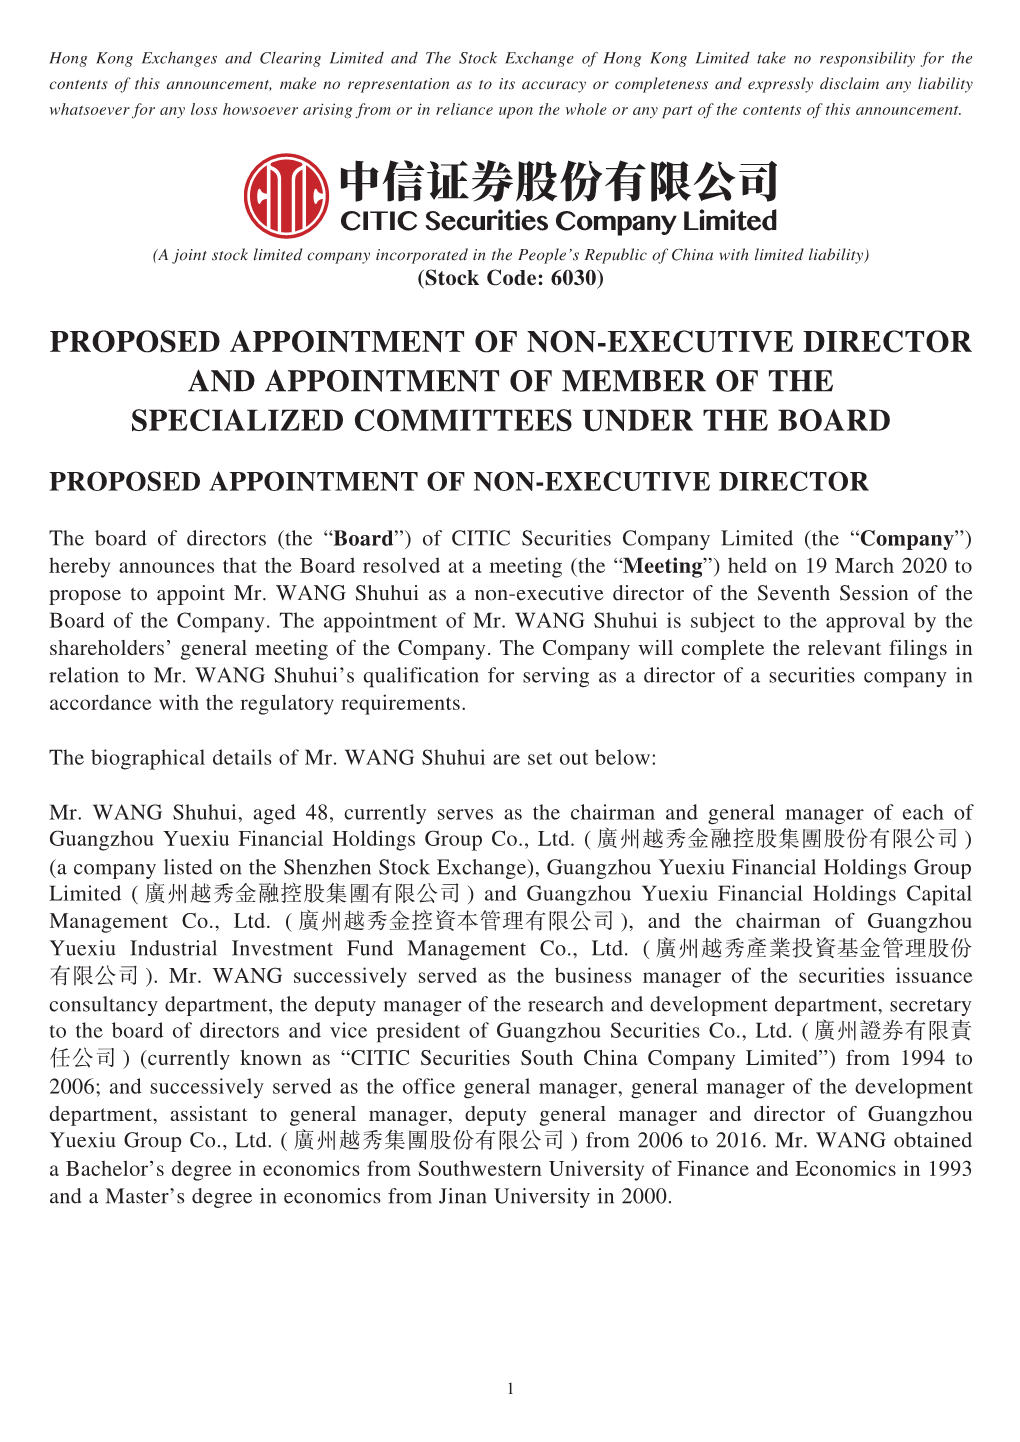 Proposed Appointment of Non-Executive Director and Appointment of Member of the Specialized Committees Under the Board